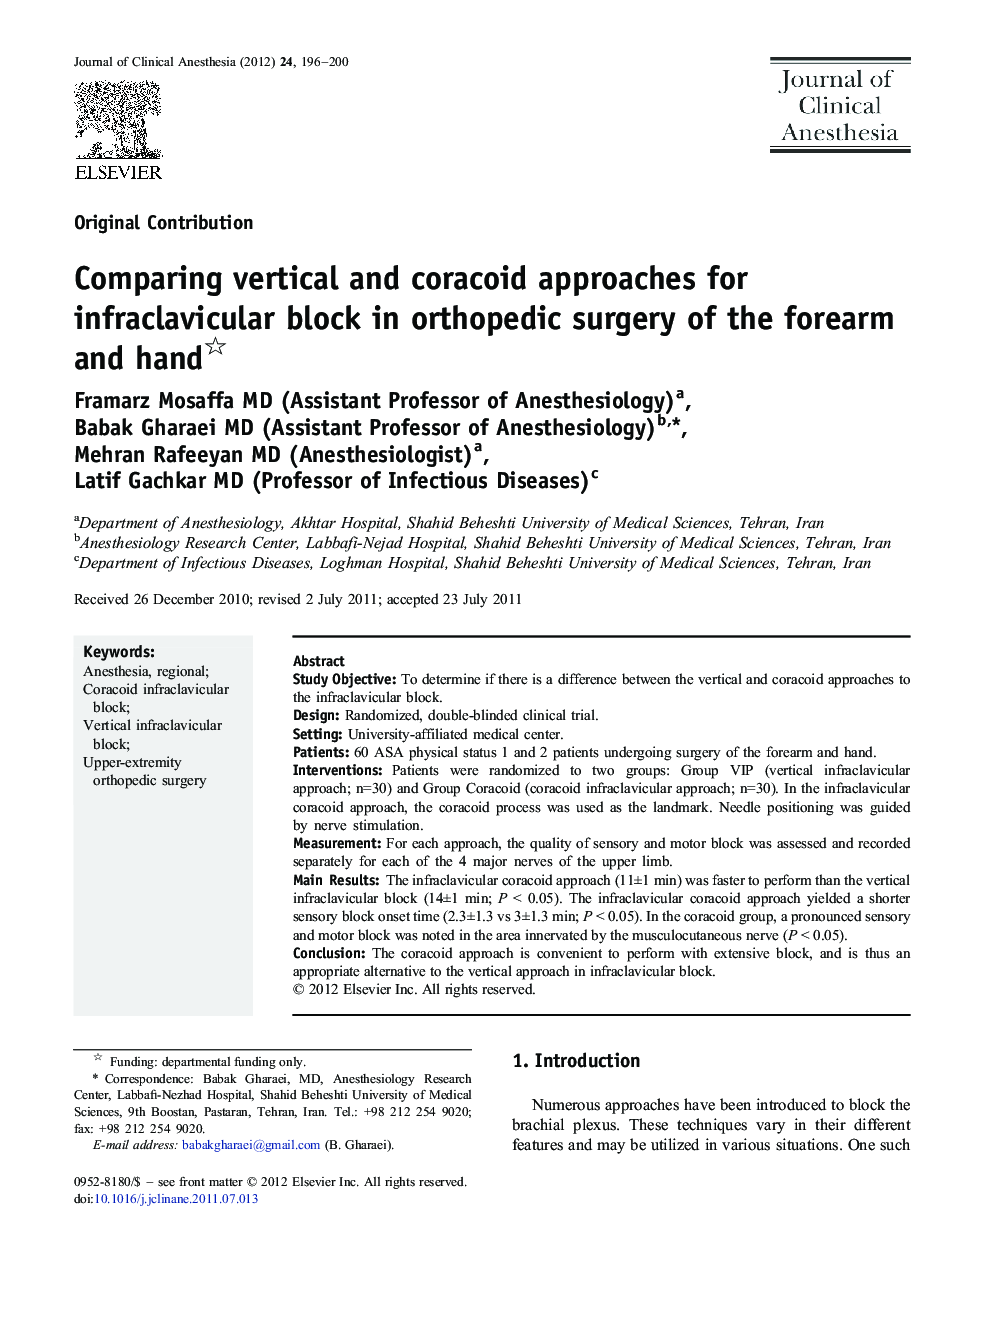 Comparing vertical and coracoid approaches for infraclavicular block in orthopedic surgery of the forearm and hand 